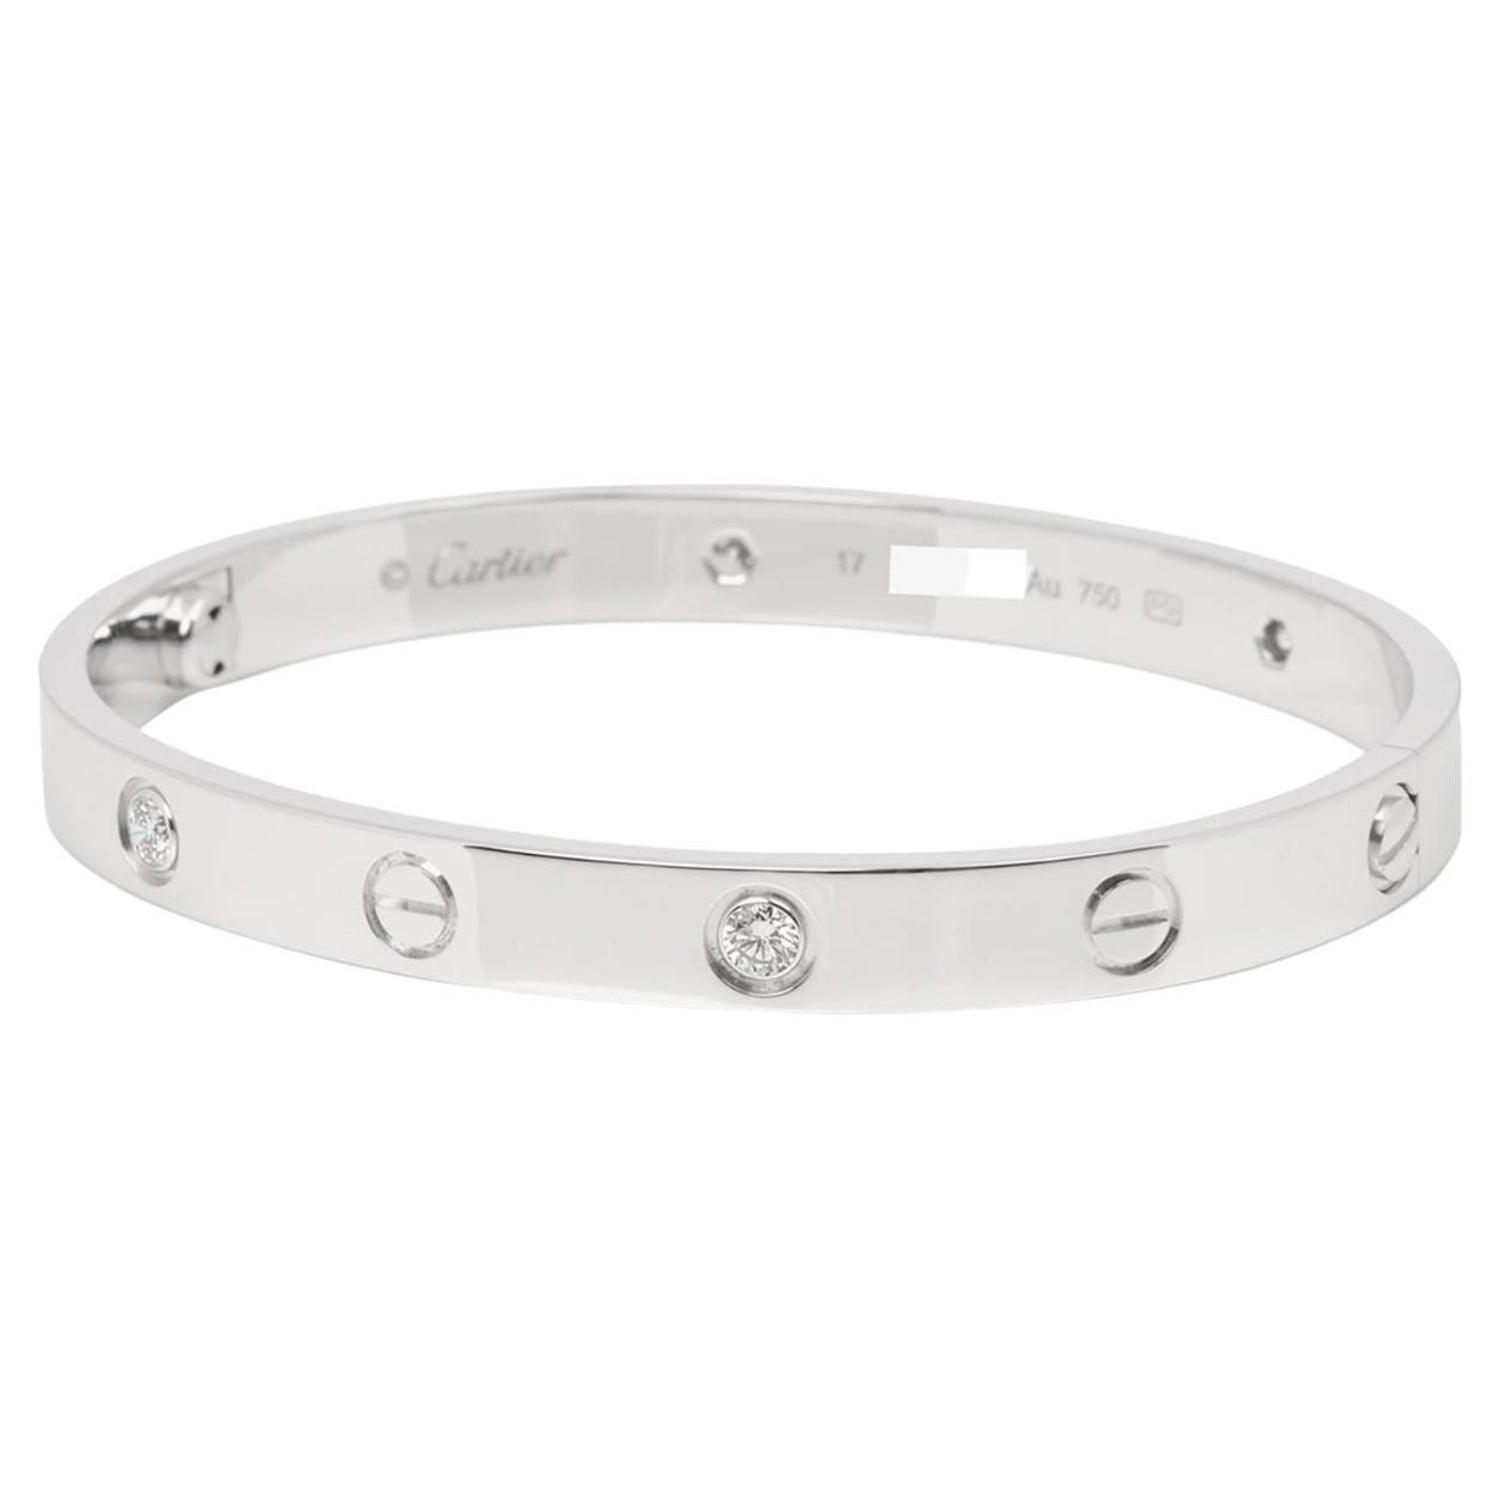 Pre-owned Cartier Love Ladies 18K White Gold Bracelet, SM Size 16 cm / 6 in Size 16 in Gold / Silver / White